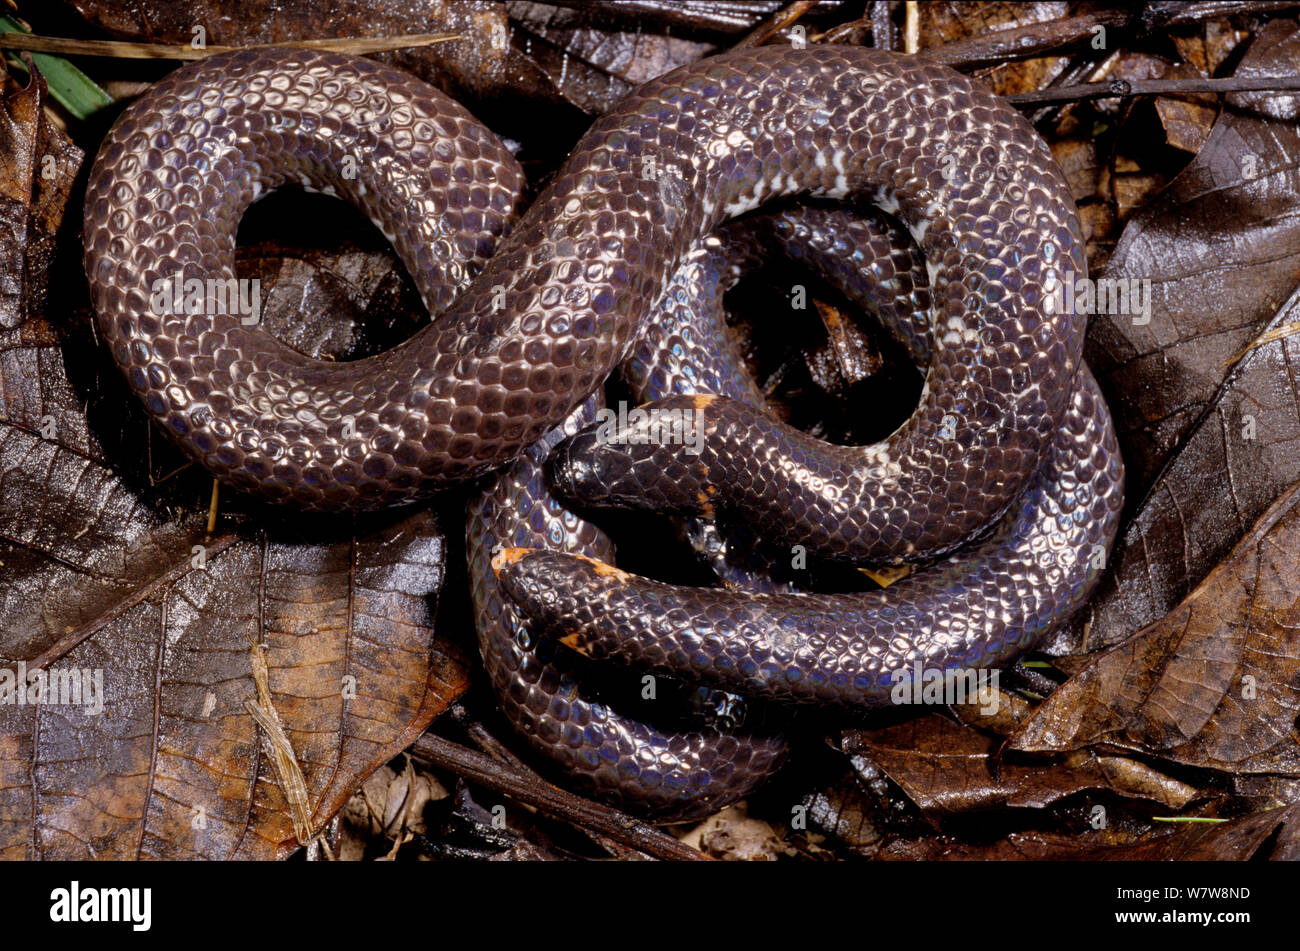 https://c8.alamy.com/comp/W7W8ND/red-tailed-pipe-snake-cylindrophis-ruffus-in-defensive-posture-south-east-asia-W7W8ND.jpg